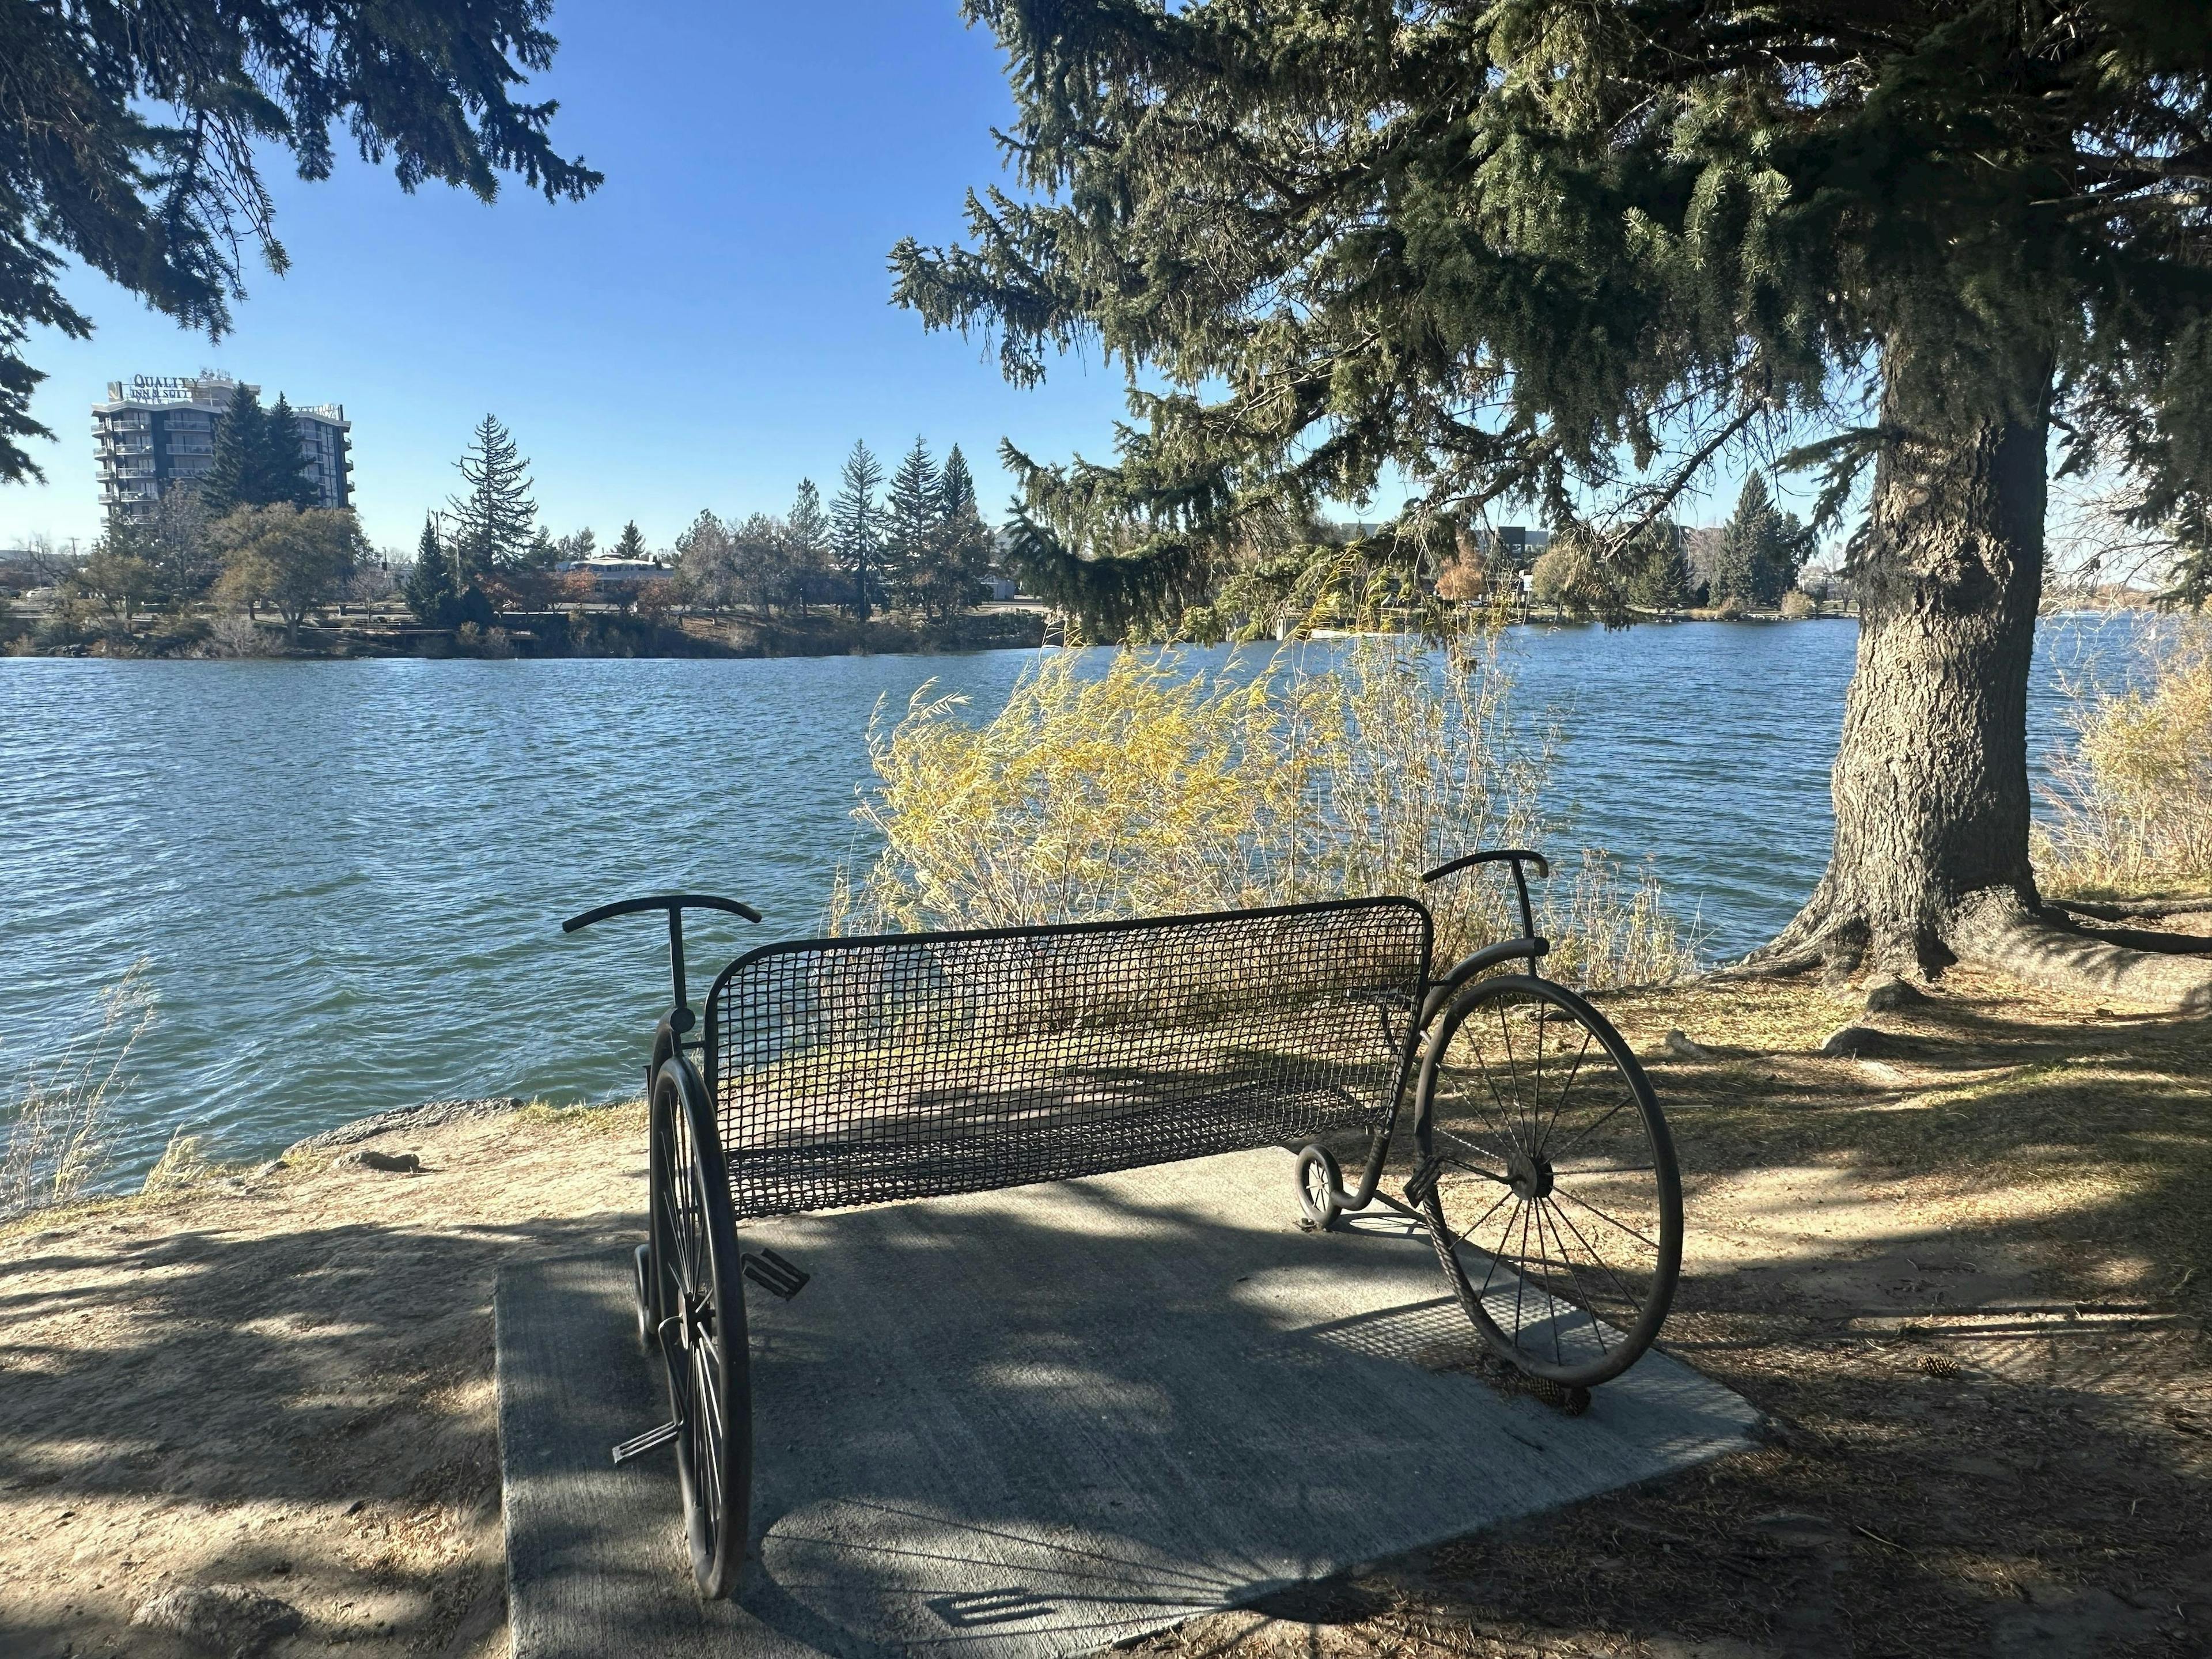 A park bench on the Idaho Falls Greenbelt and Riverwalk in Eastern Idaho along the Snake River.